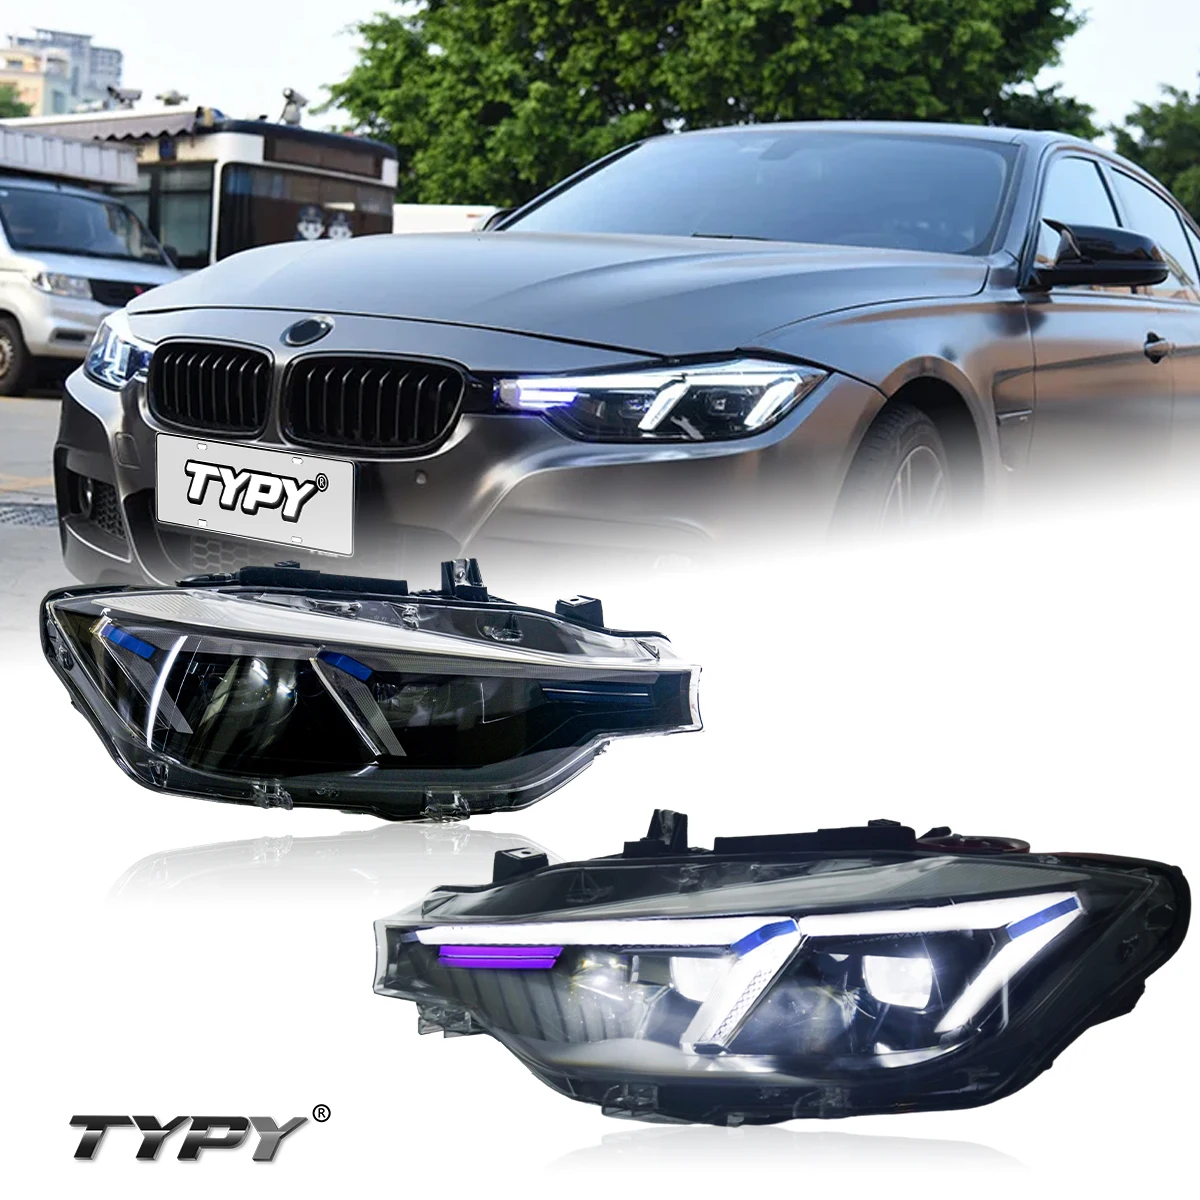 

TYPY Car light for All LED module upgrade modified new highlight headlight assembly for BMW 3 SERIES F30 2013-2018